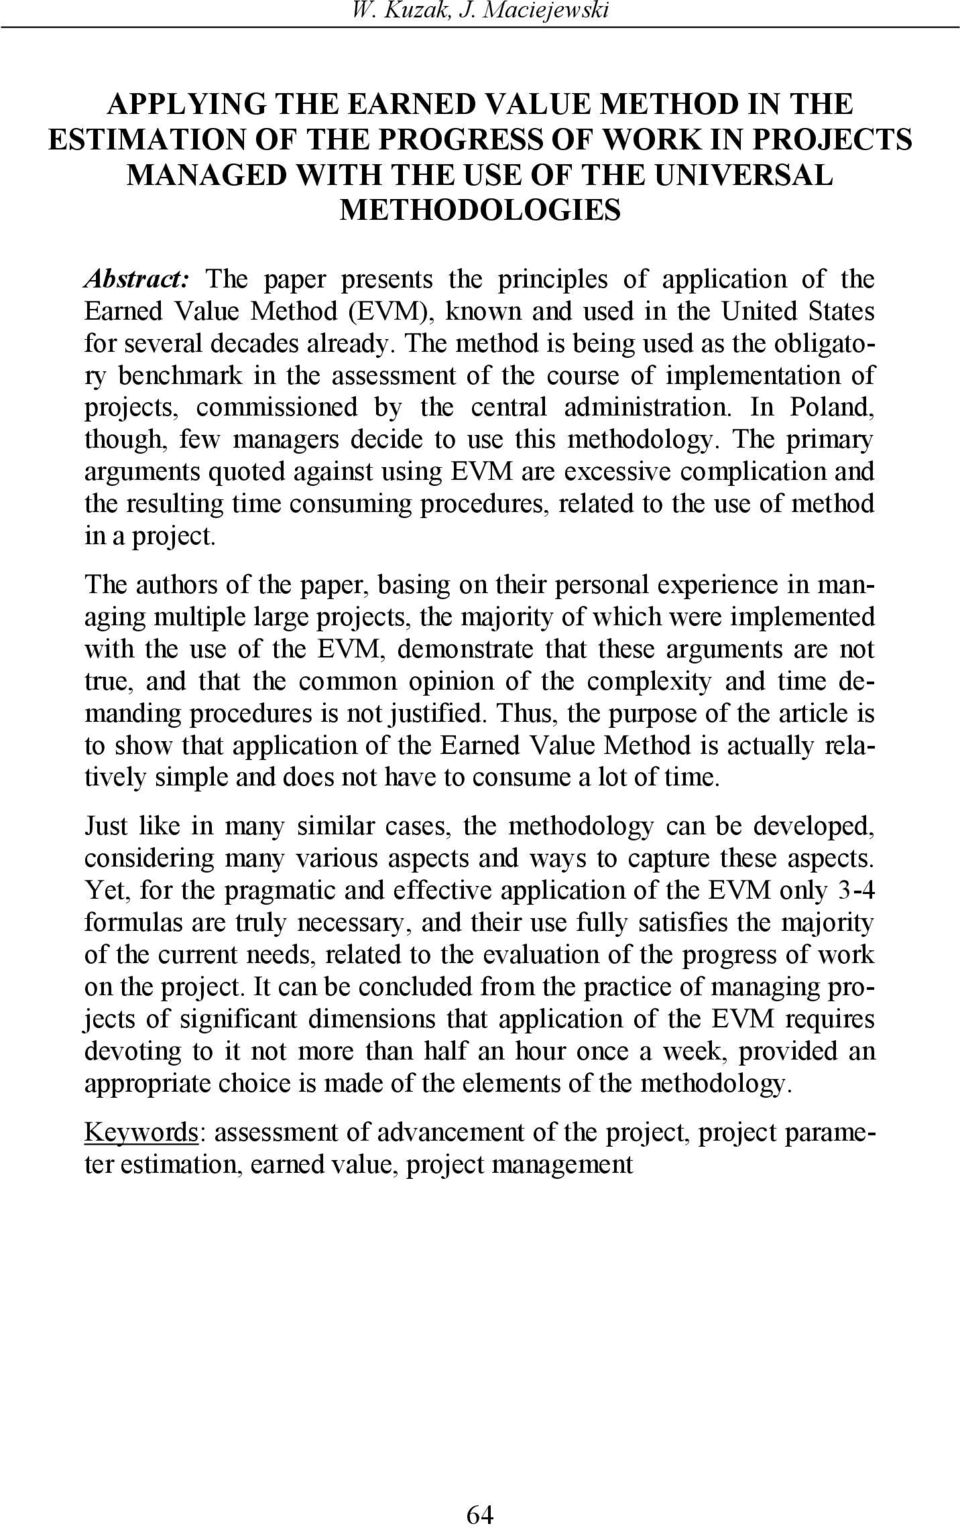 application of the Earned Value Method (EVM), known and used in the United States for several decades already.